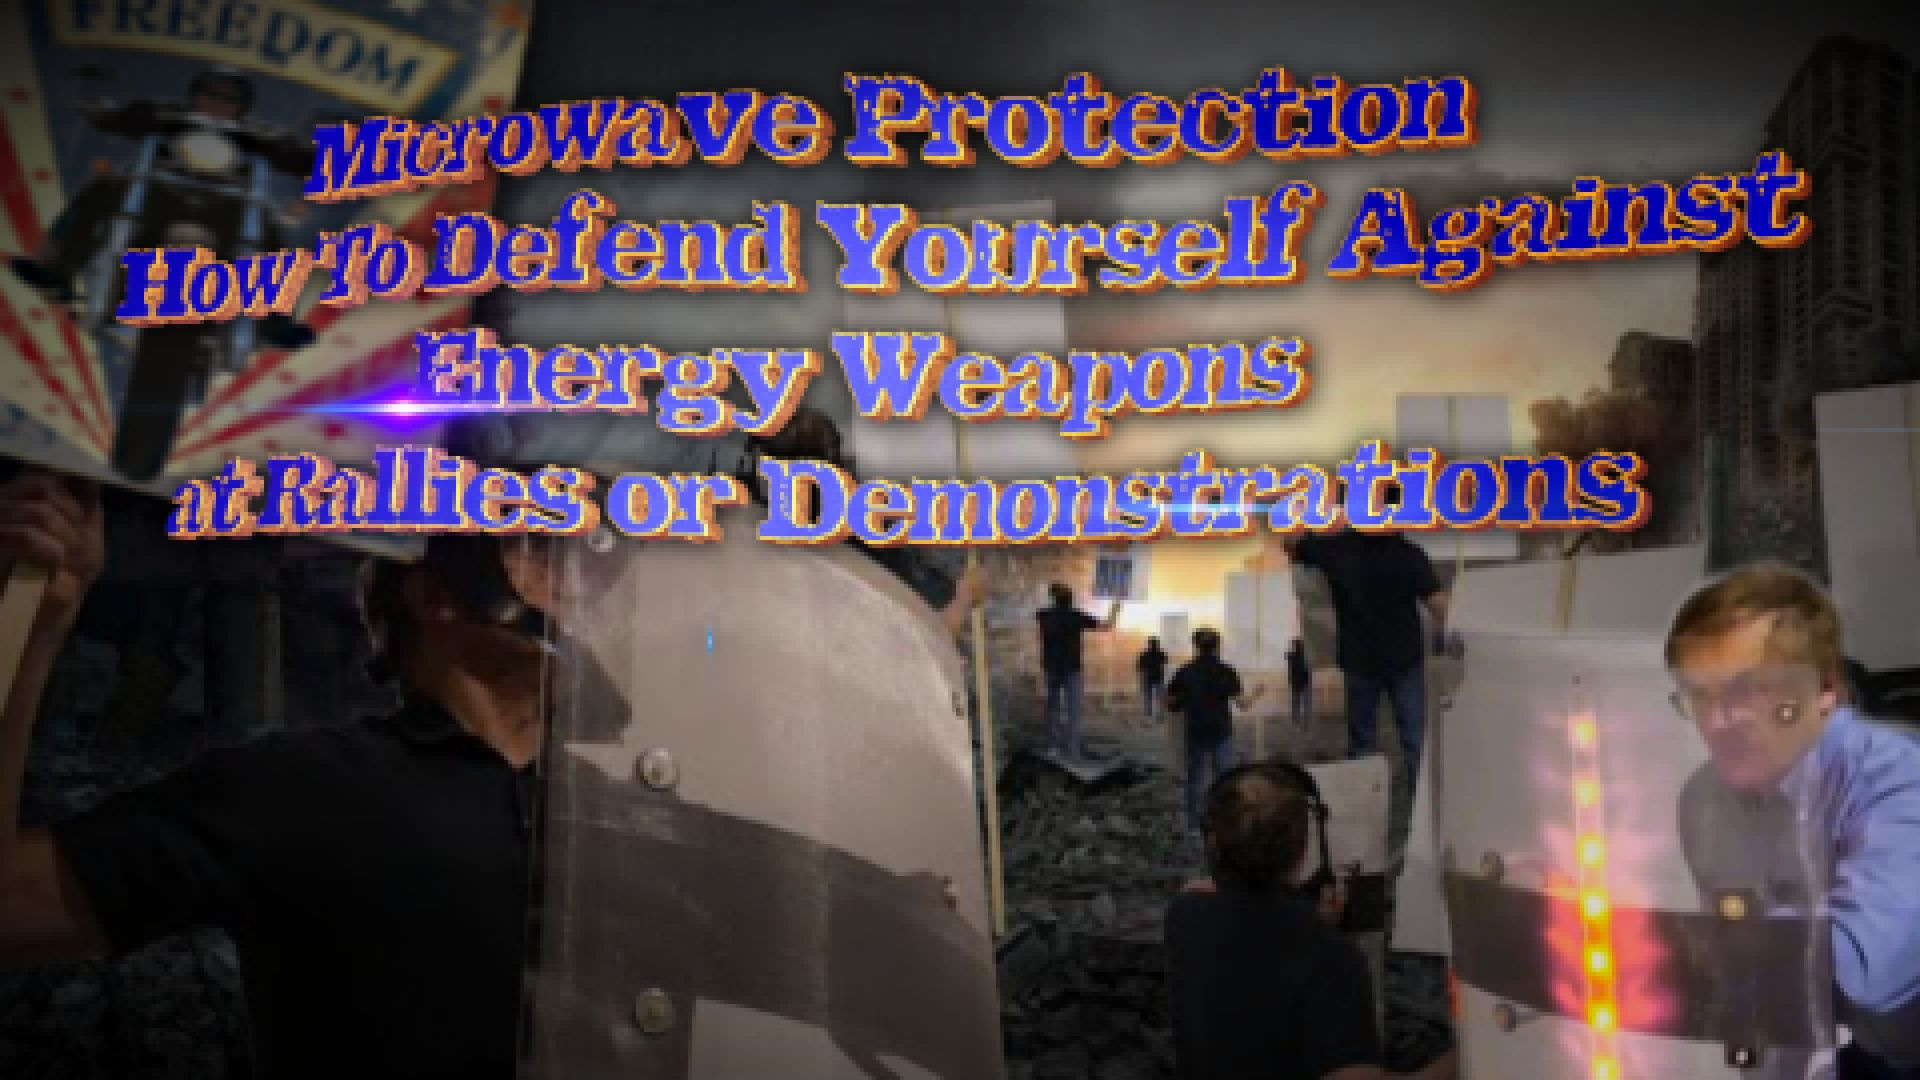 Microwave Protection – How To Defend Yourself Against Energy Weapons at Rallies or Demonstrations